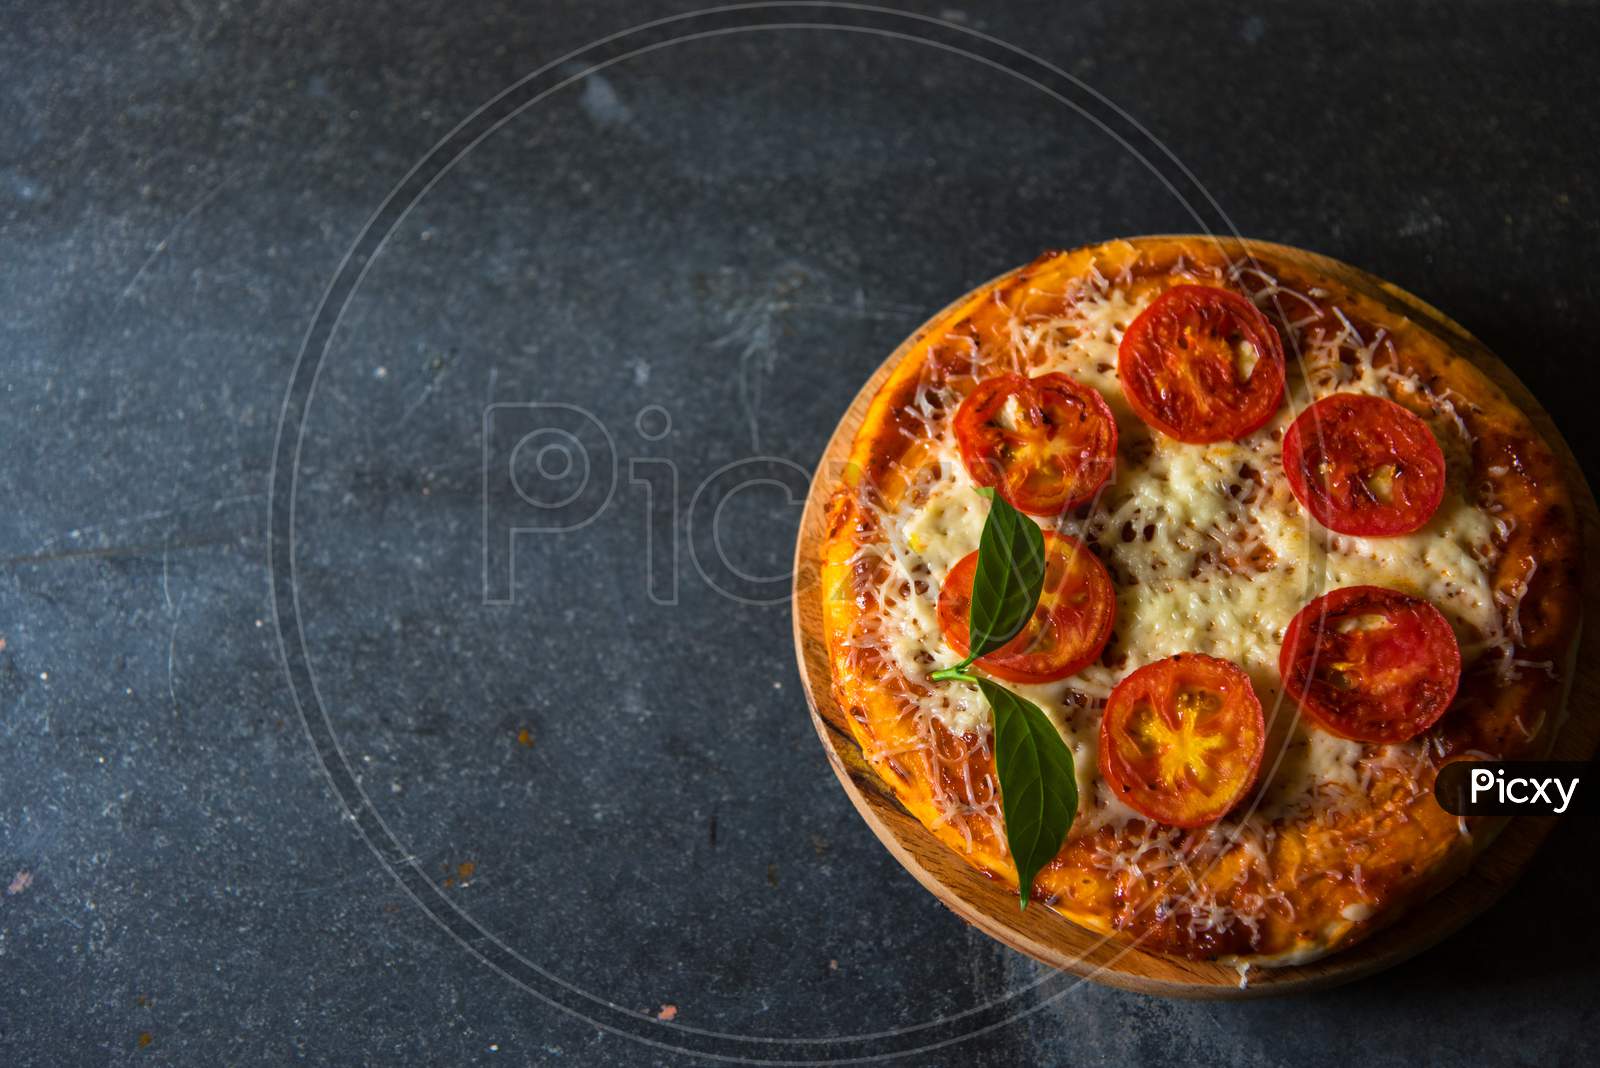 Cheese And Tomato Pizza